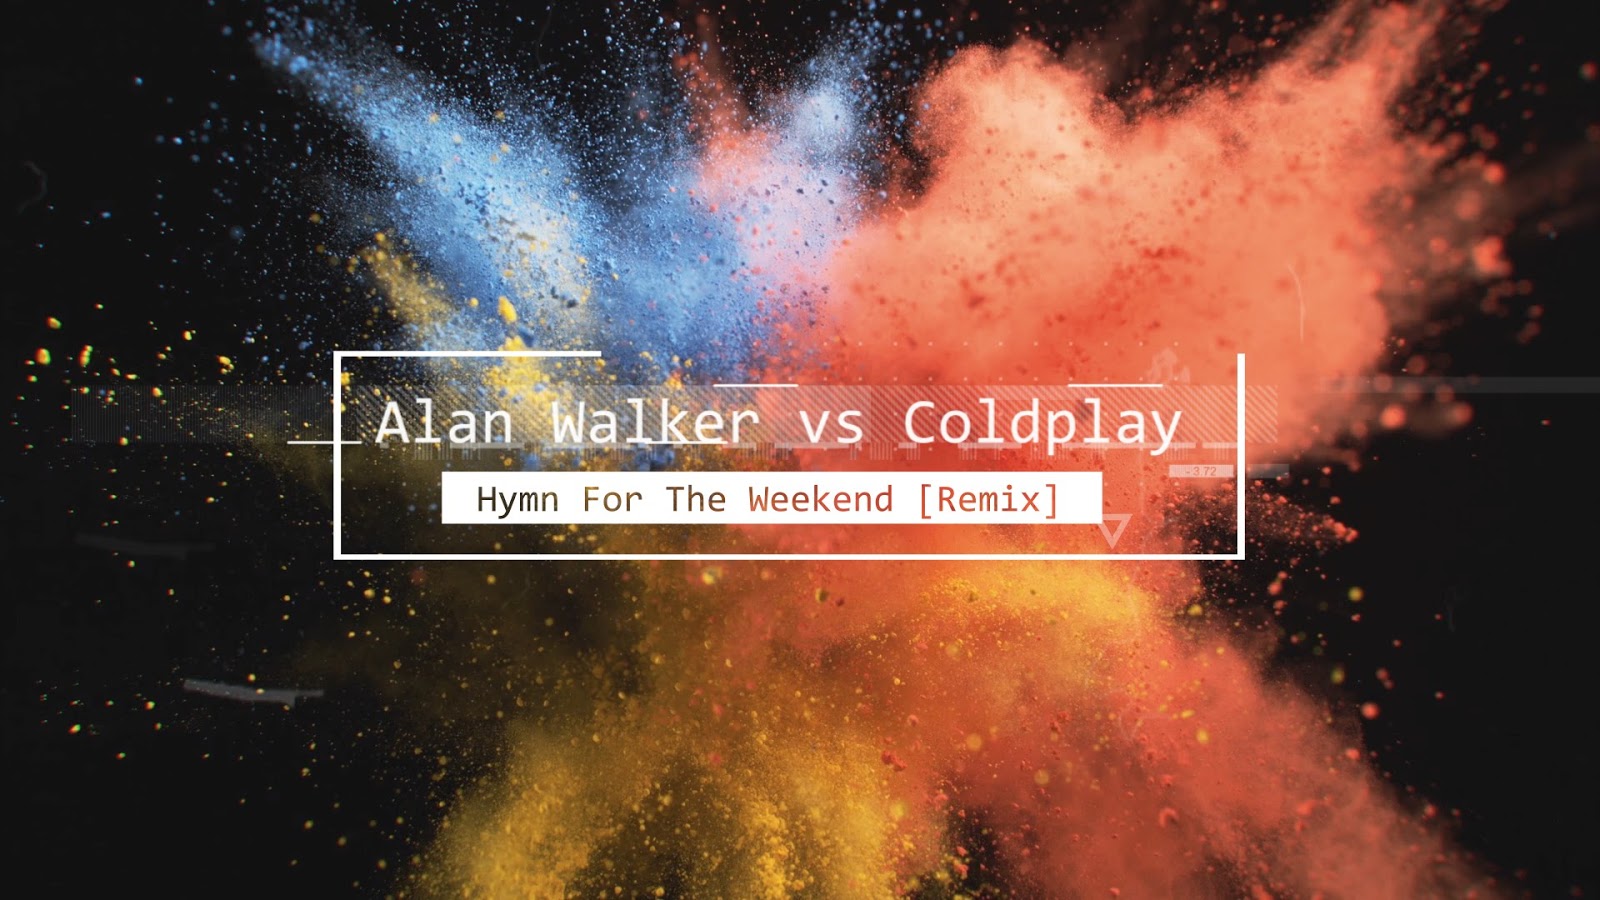 Hymn for the weekend mp3. Coldplay Hymn for the. Hymn for the weekend alan Walker Remix. Alan Walker vs Coldplay. Coldplay Hymn for the weekend Remix.